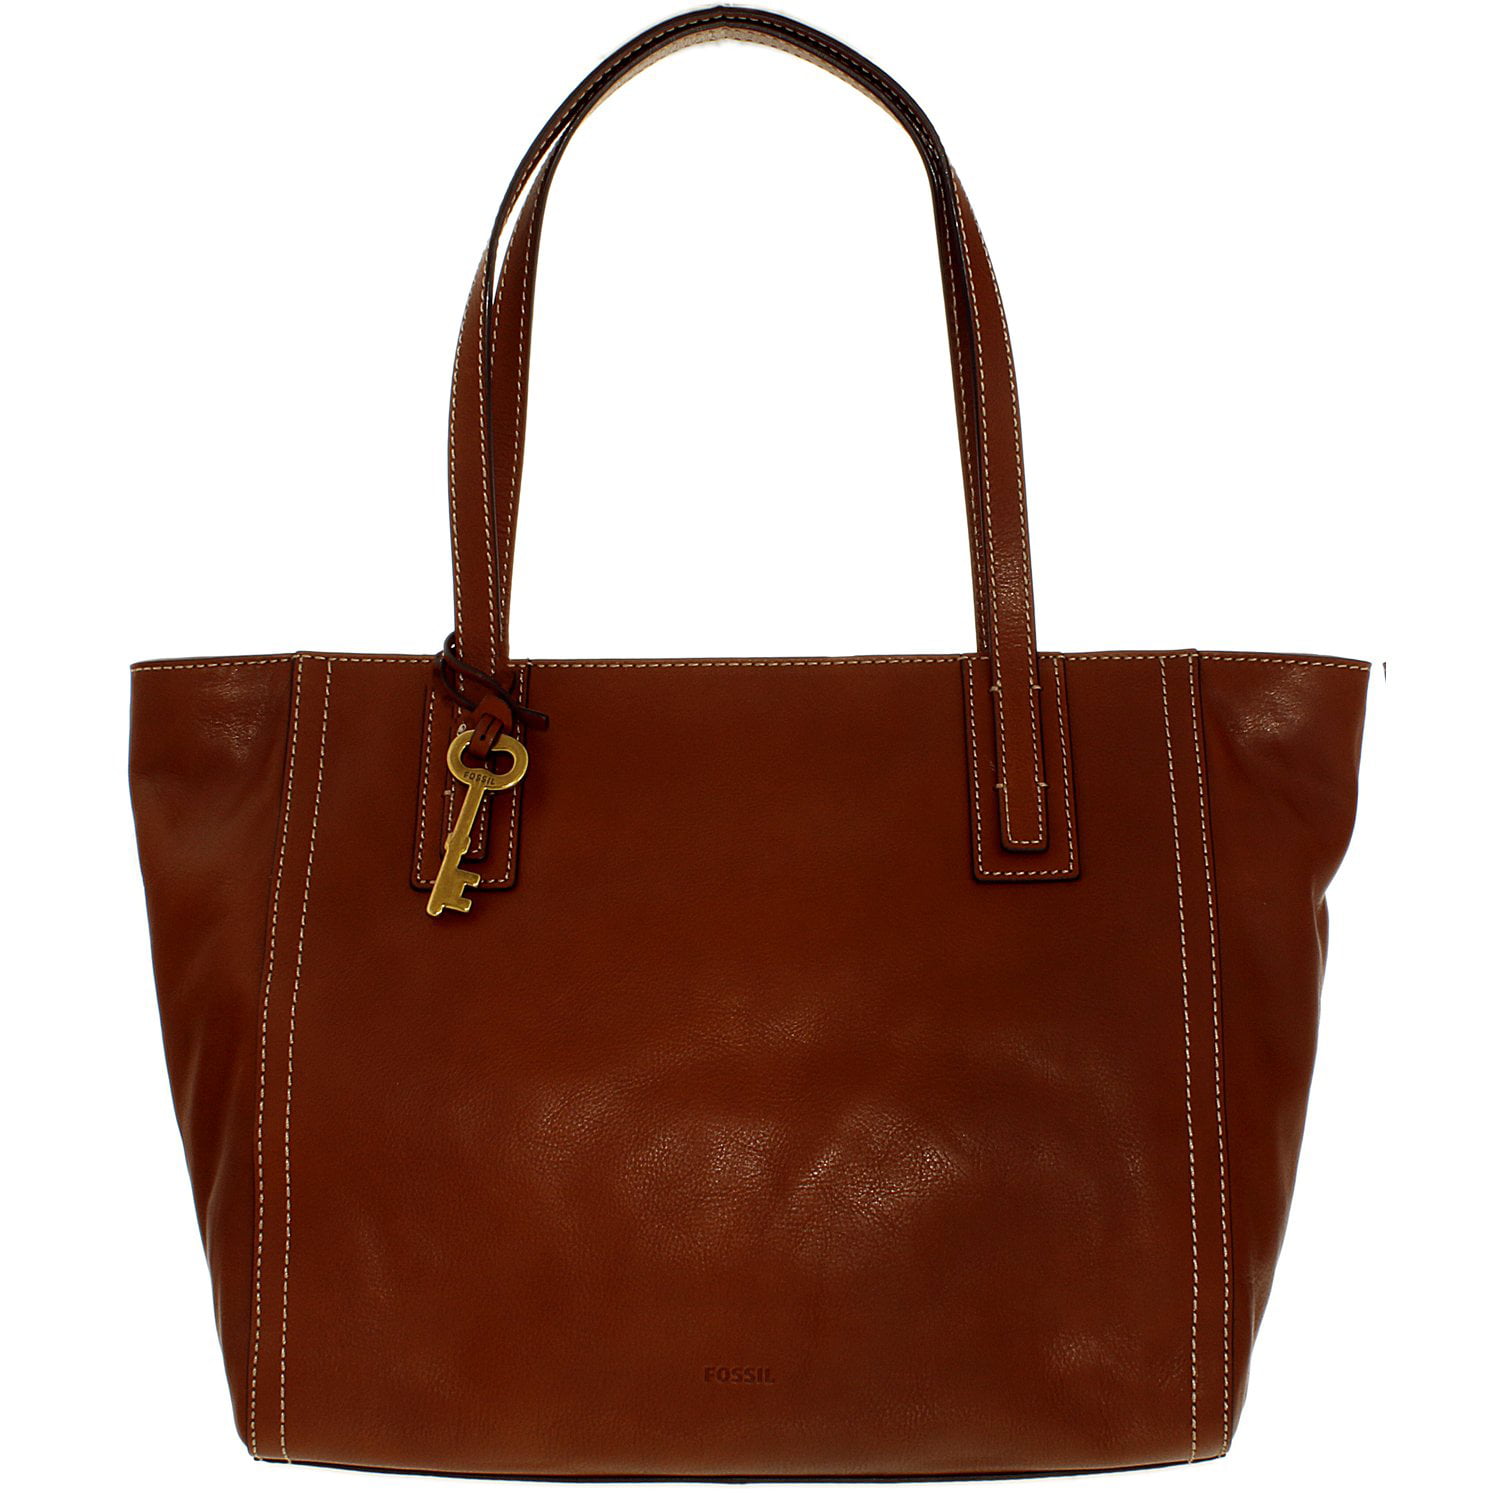 Fossil Women's Emma Leather Leather Top-Handle Bag Tote - Brown ...